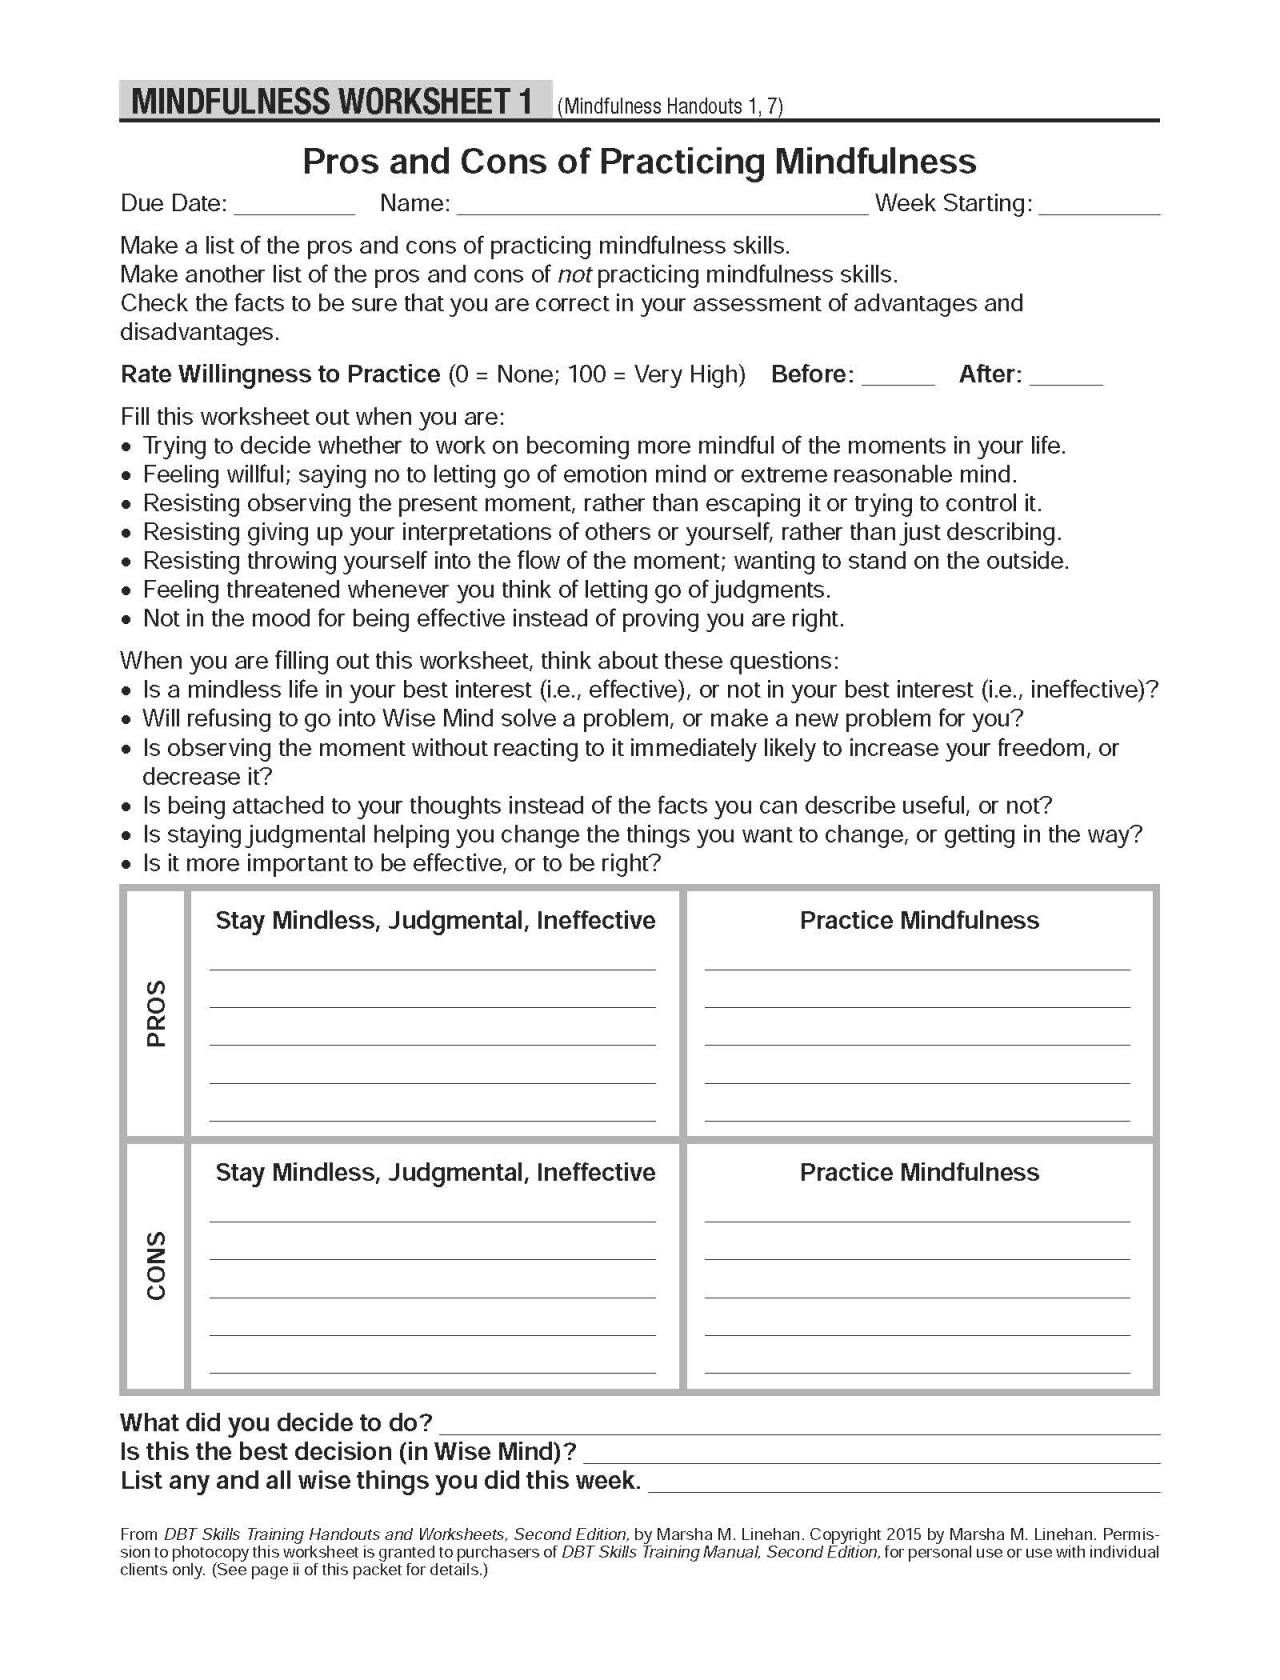 DBT Self Help Resources Pros And Cons Of Practicing Mindfulness Fill This Worksheet Out When You Are Try Dbt Mindfulness Therapy Worksheets Dbt Self Help